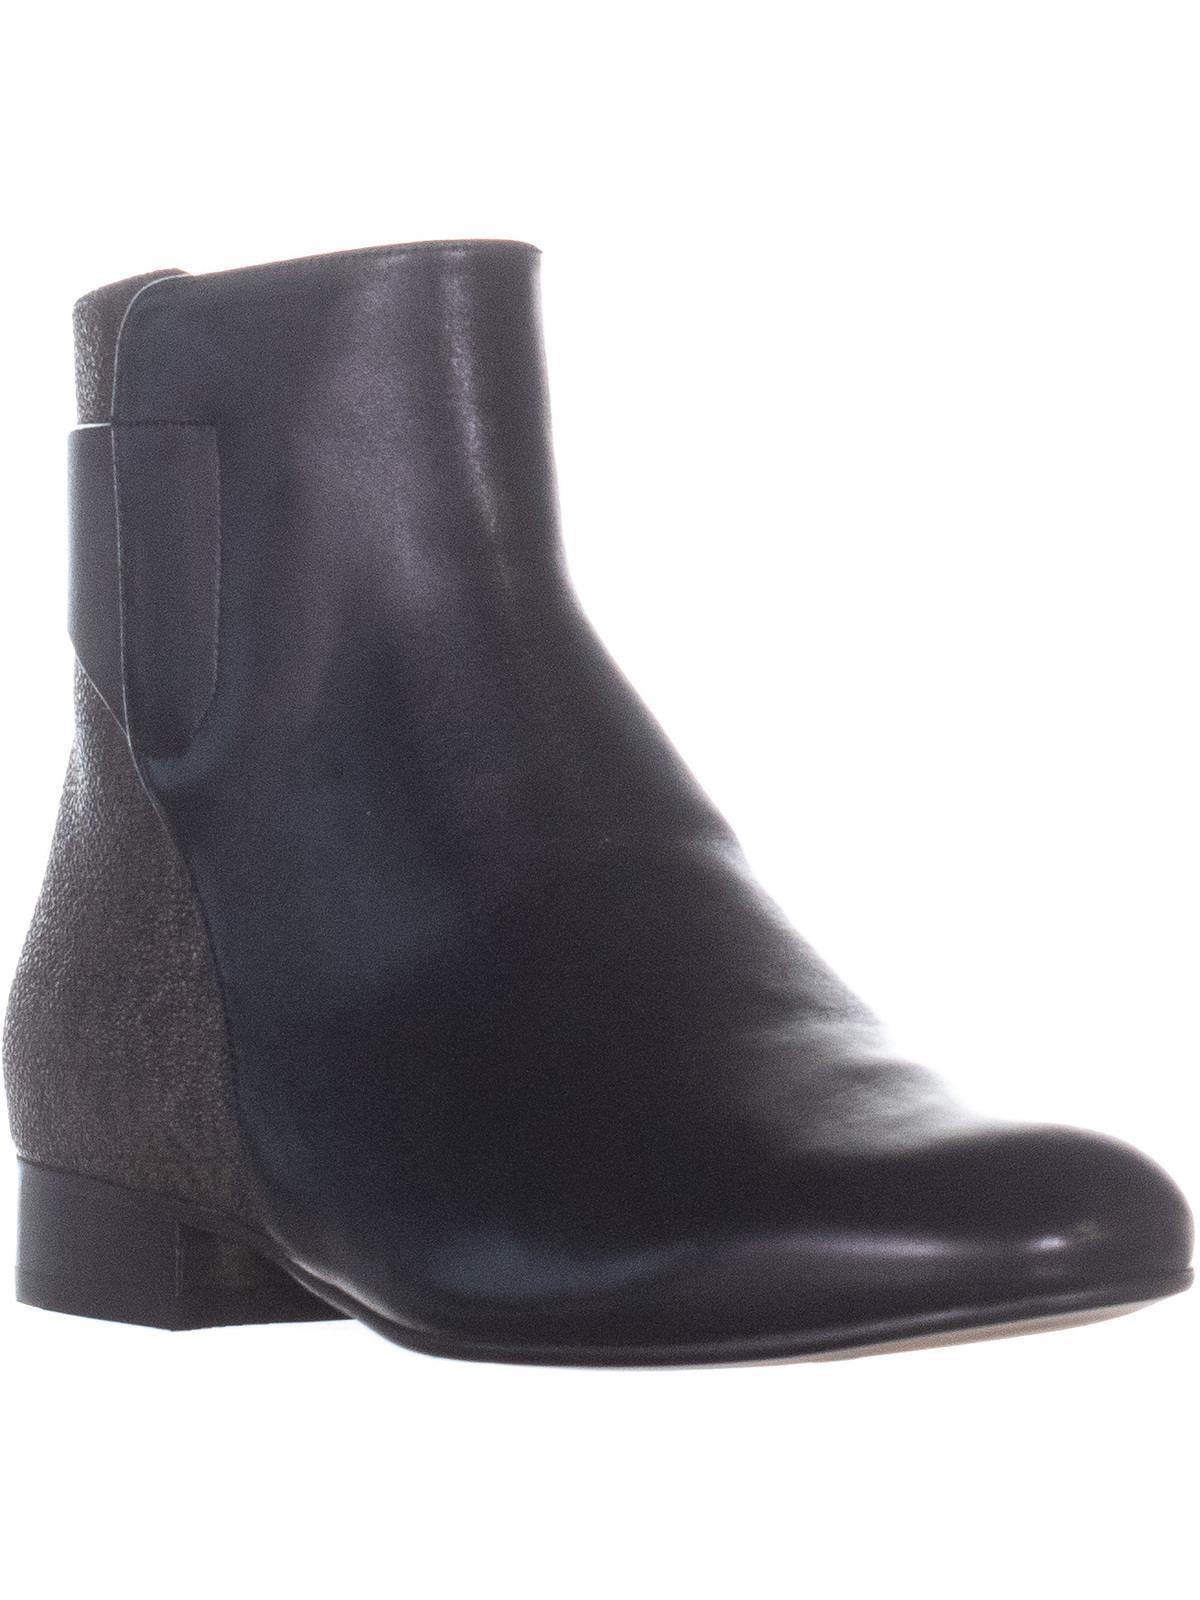 michael kors mira ankle boots